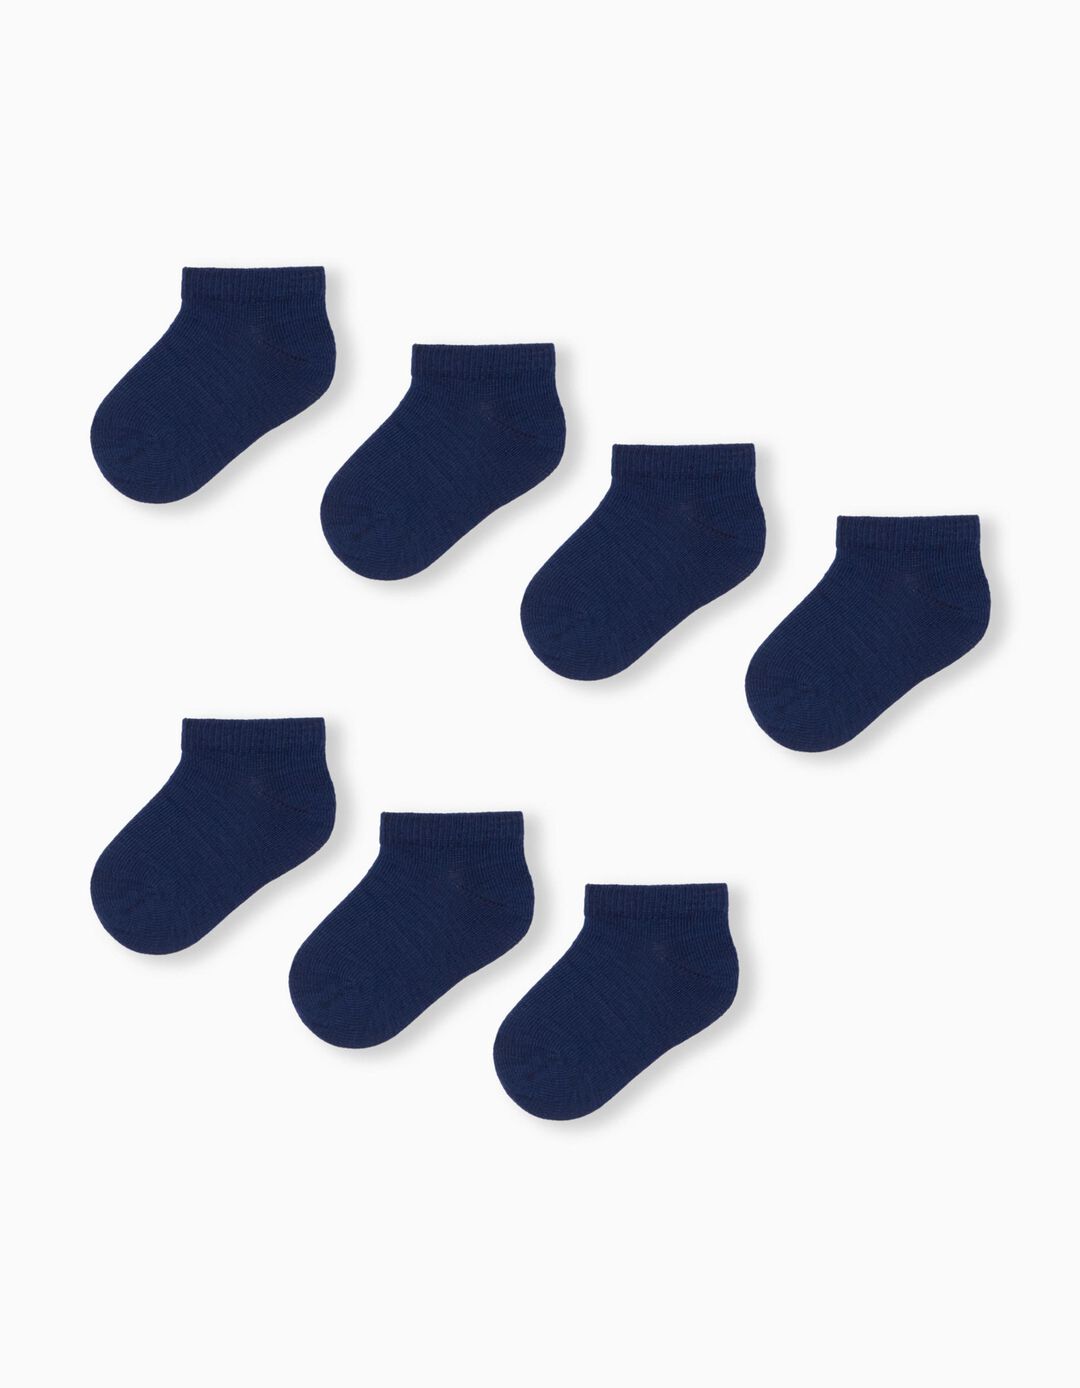 7 Pairs of Invisible Socks Pack, Baby Boys, Dark Blue